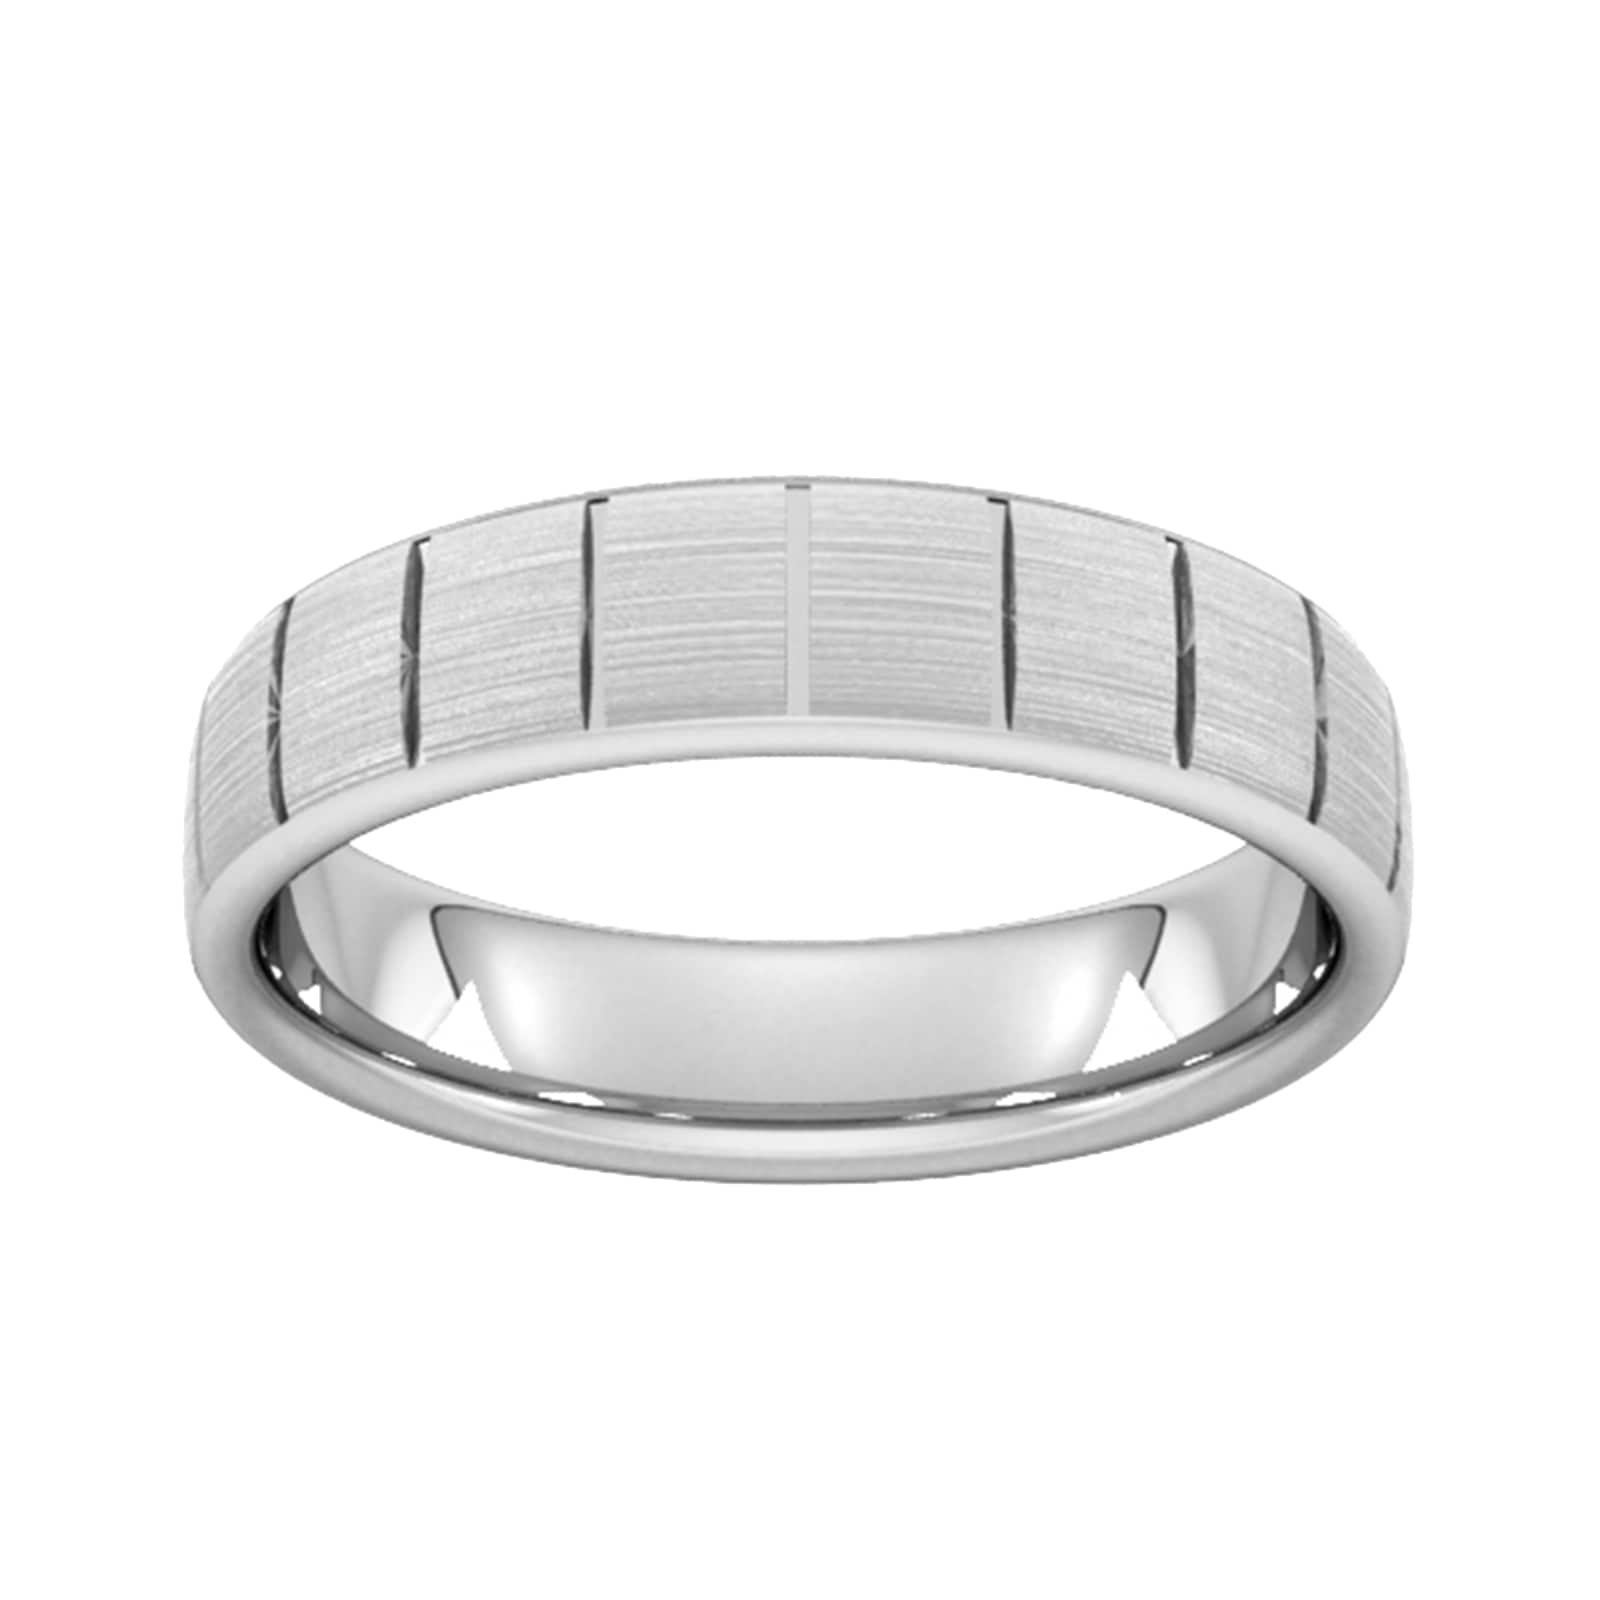 5mm Slight Court Standard Vertical Lines Wedding Ring In 9 Carat White Gold - Ring Size L